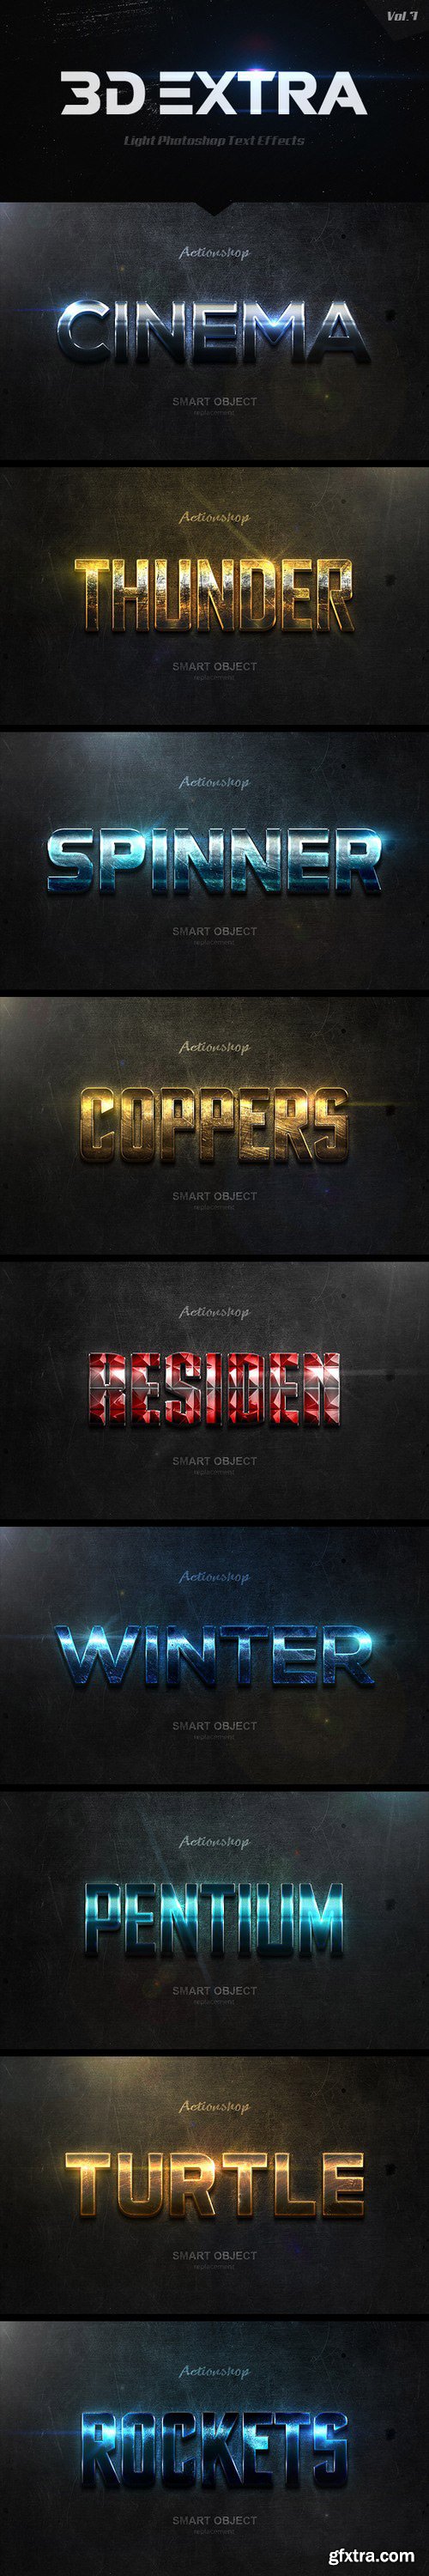 Graphicriver - New 3D Extra Light Text Effects Vol.7 20452625